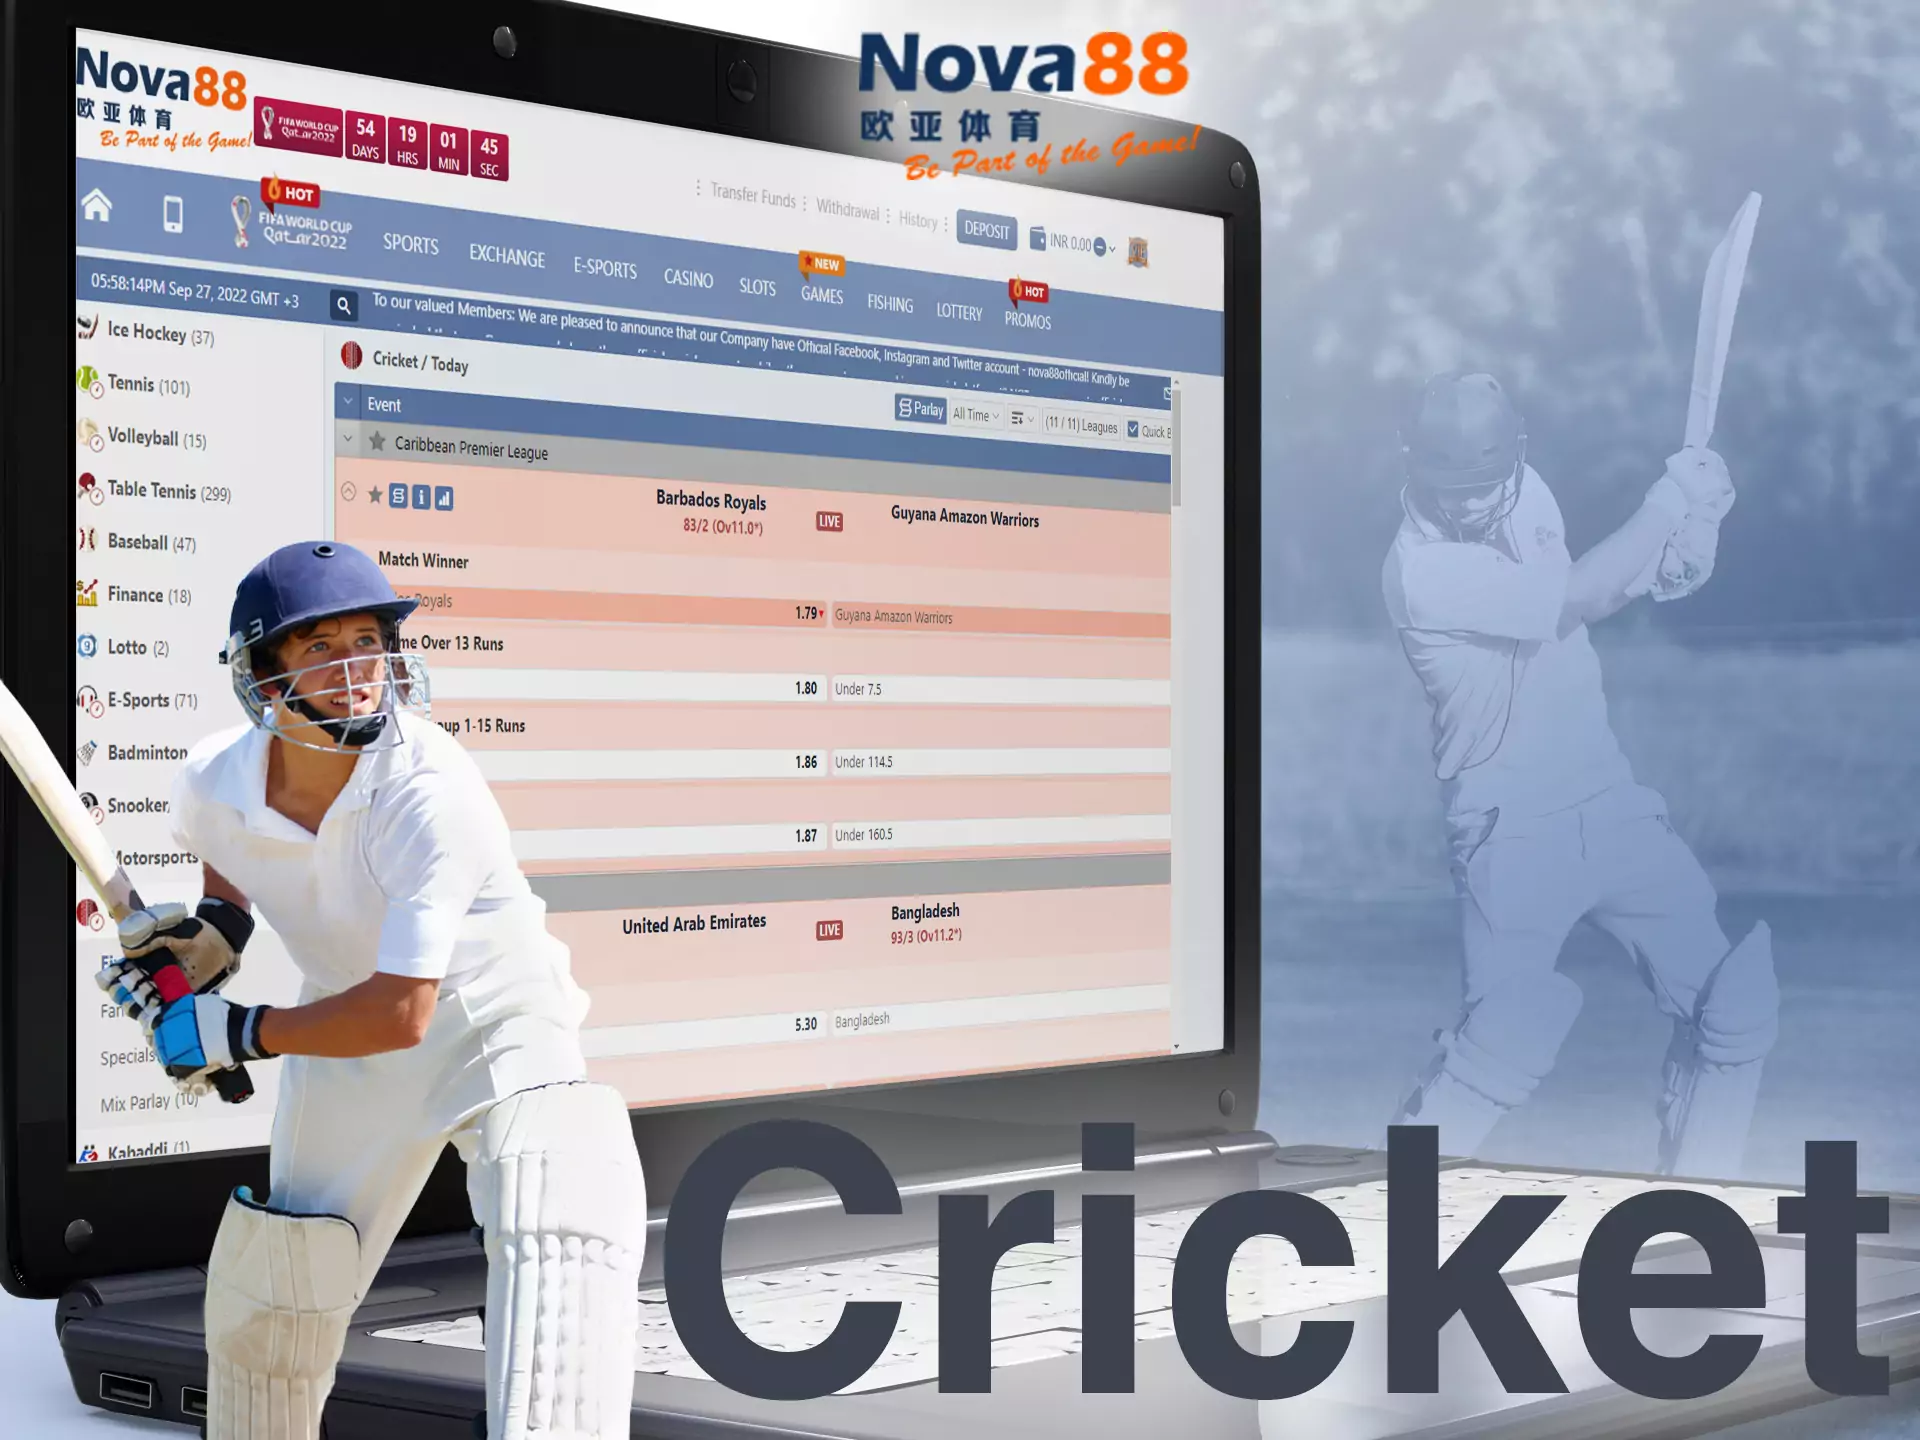 In the Nova88 sportsbook, you can place bets on cricket anytime.